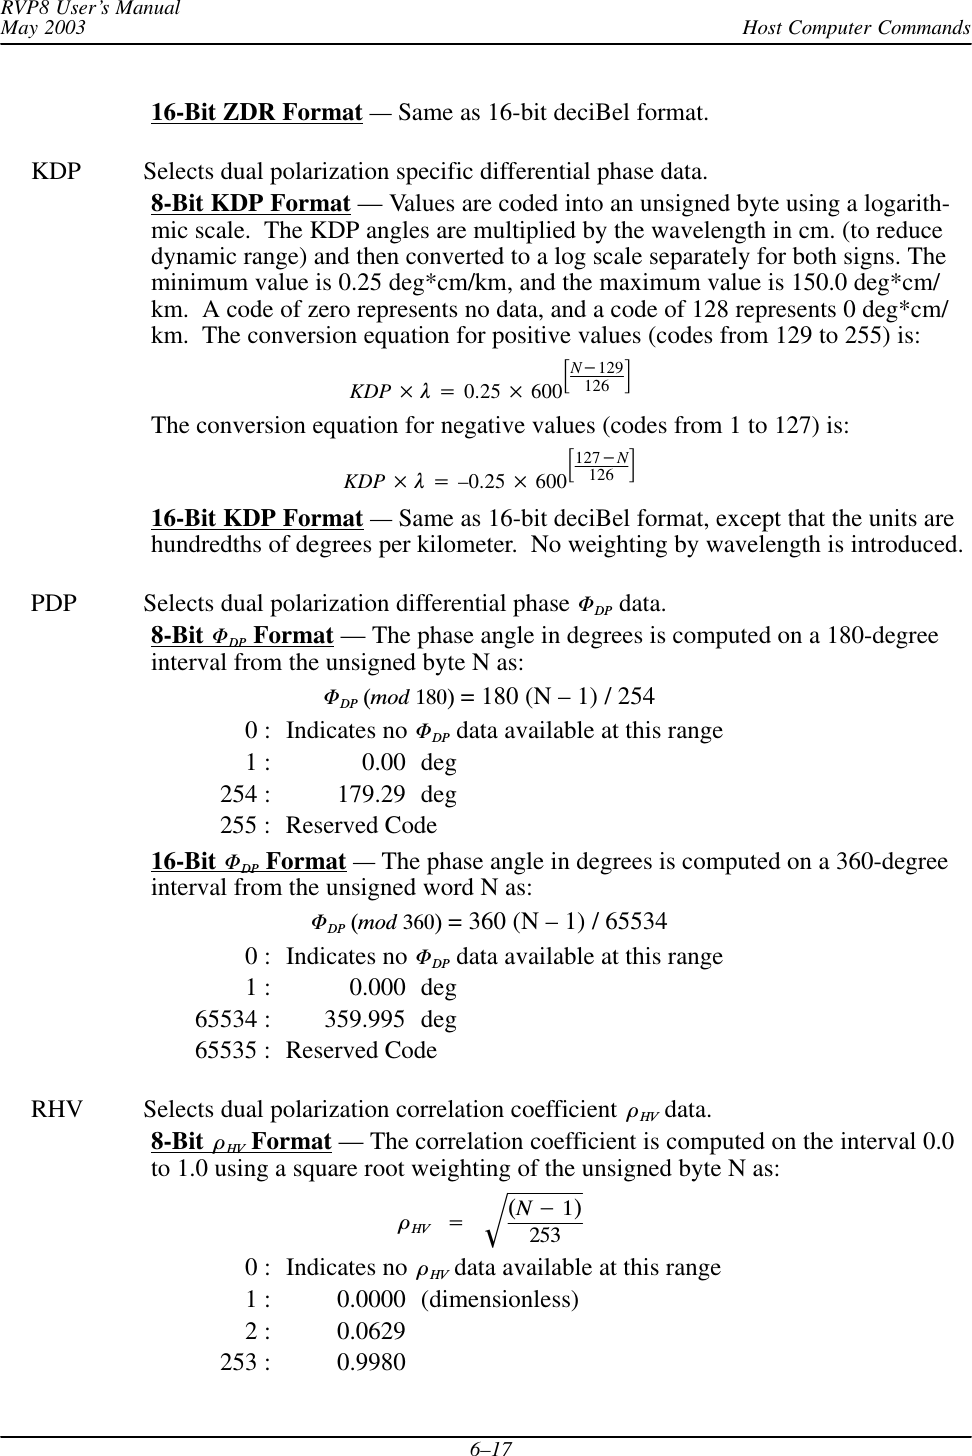 Host Computer CommandsRVP8 User’s ManualMay 20036–1716-Bit ZDR Format — Same as 16-bit deciBel format.KDP Selects dual polarization specific differential phase data.8-Bit KDP Format — Values are coded into an unsigned byte using a logarith-mic scale.  The KDP angles are multiplied by the wavelength in cm. (to reducedynamic range) and then converted to a log scale separately for both signs. Theminimum value is 0.25 deg*cm/km, and the maximum value is 150.0 deg*cm/km.  A code of zero represents no data, and a code of 128 represents 0 deg*cm/km.  The conversion equation for positive values (codes from 129 to 255) is:KDP 0.25 600N129126 The conversion equation for negative values (codes from 1 to 127) is:KDP –0.25 600127N126 16-Bit KDP Format — Same as 16-bit deciBel format, except that the units arehundredths of degrees per kilometer.  No weighting by wavelength is introduced.PDP Selects dual polarization differential phase DP data.8-Bit DP Format — The phase angle in degrees is computed on a 180-degreeinterval from the unsigned byte N as:DP(mod180) = 180 (N – 1) / 2540 : Indicates no DP data available at this range1 : 0.00 deg254 : 179.29 deg255 : Reserved Code16-Bit DP Format — The phase angle in degrees is computed on a 360-degreeinterval from the unsigned word N as:DP(mod360) = 360 (N – 1) / 655340 : Indicates no DP data available at this range1 : 0.000 deg65534 : 359.995 deg65535 : Reserved CodeRHV Selects dual polarization correlation coefficient HV data.8-Bit  HV Format — The correlation coefficient is computed on the interval 0.0to 1.0 using a square root weighting of the unsigned byte N as:HV(N1)2530 : Indicates no  HV data available at this range1 : 0.0000 (dimensionless)2 : 0.0629253 : 0.9980